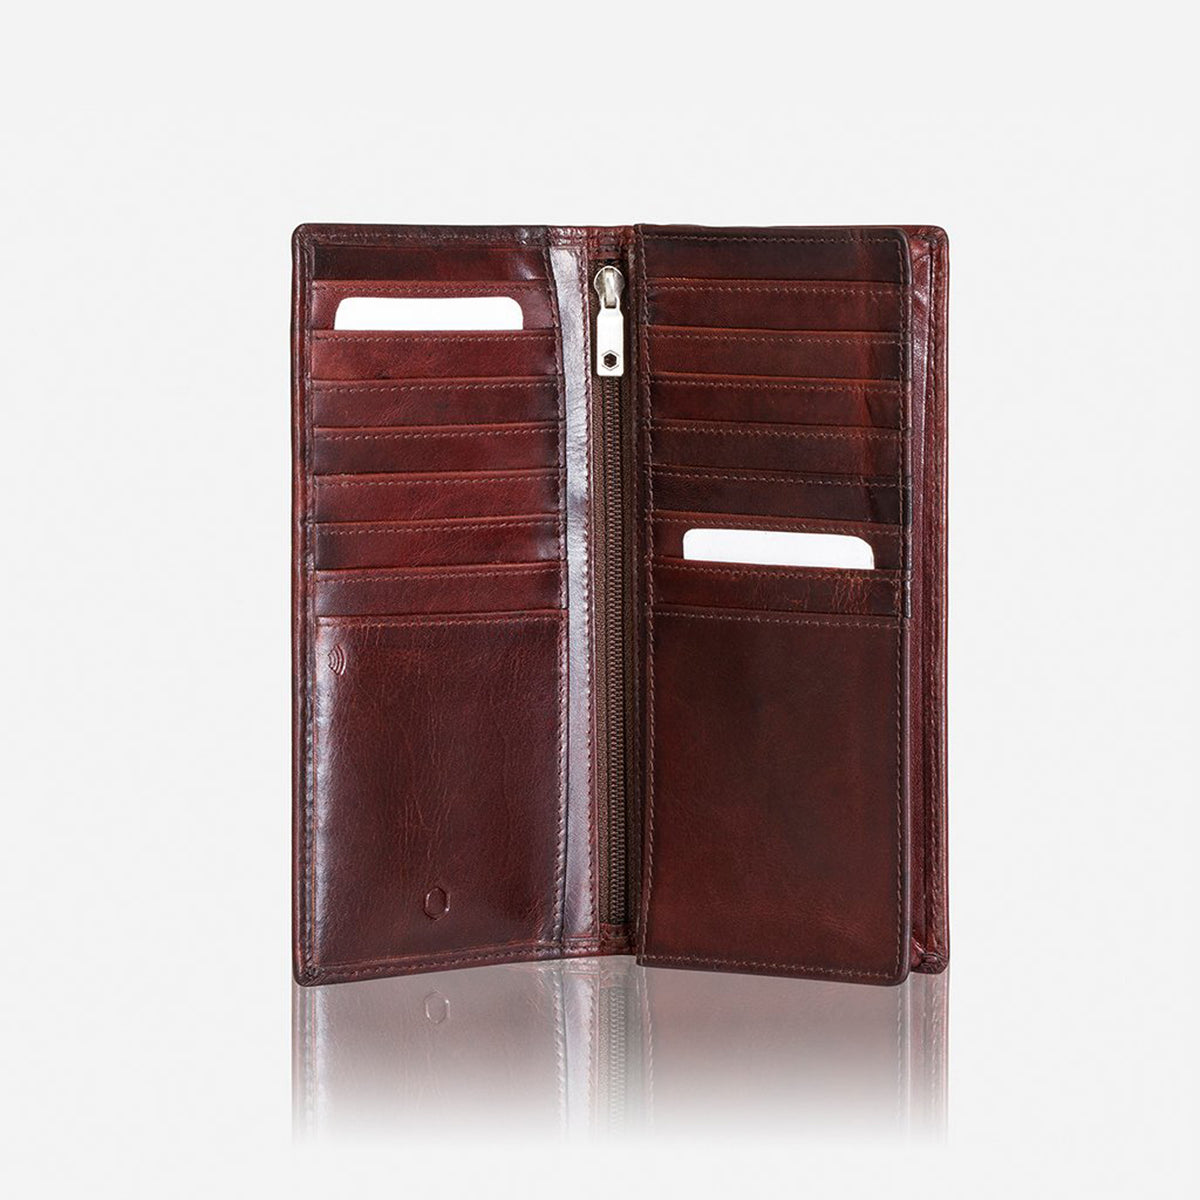 Jekyll and Hide Oxford Large Travel Wallet - Coffee